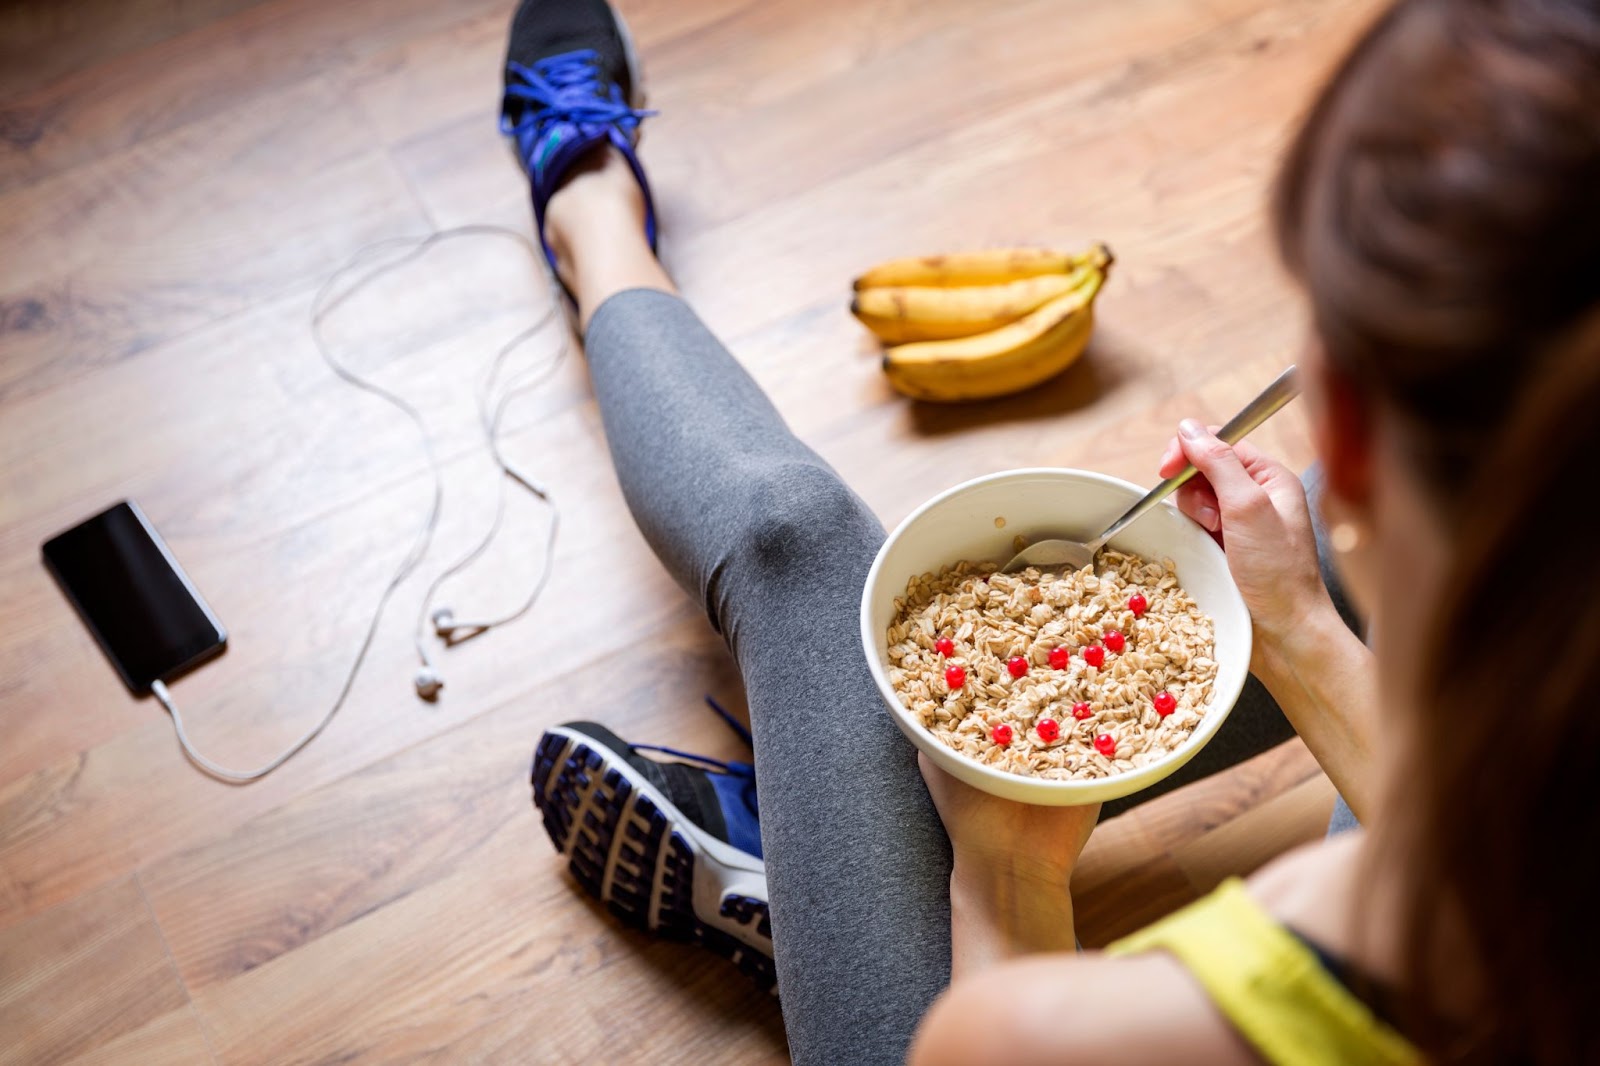 Woman eating oatmeal with cranberries after a workout